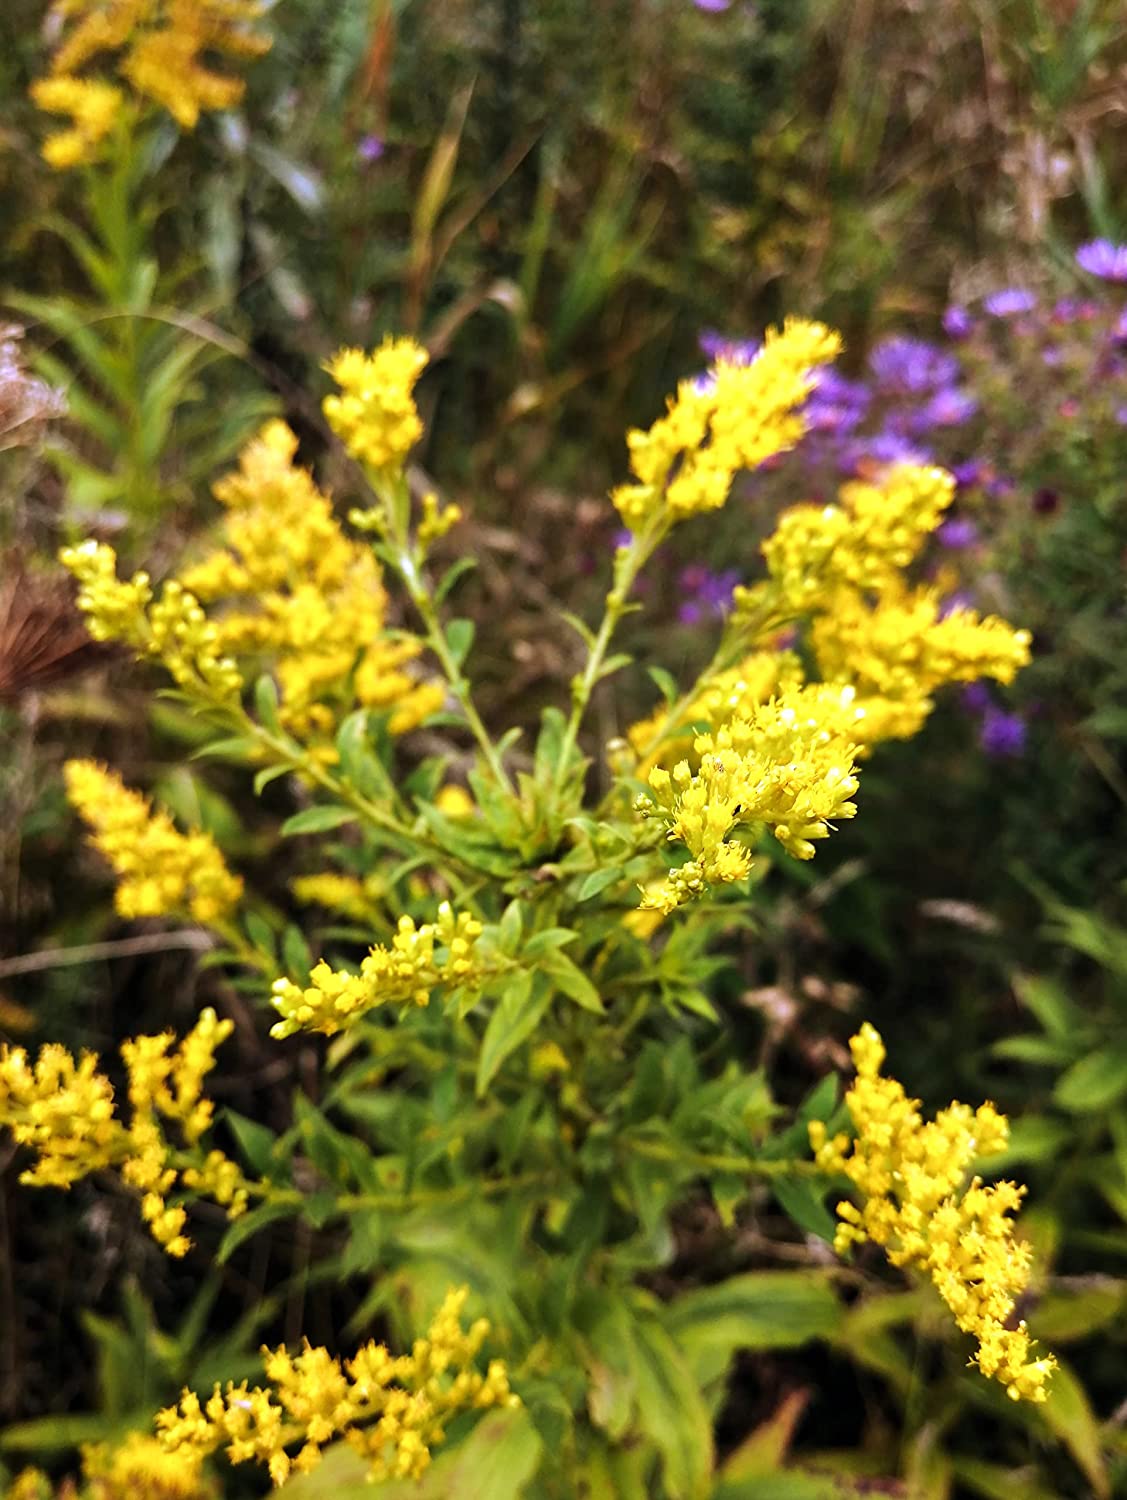 Hundredfold Gray Goldenrod, Old Field Goldenrod 500 Flower Seeds - Solidago nemoralis Canada Native Wildflower, Dwarf Goldenrod, Attract Bees and Butterflies